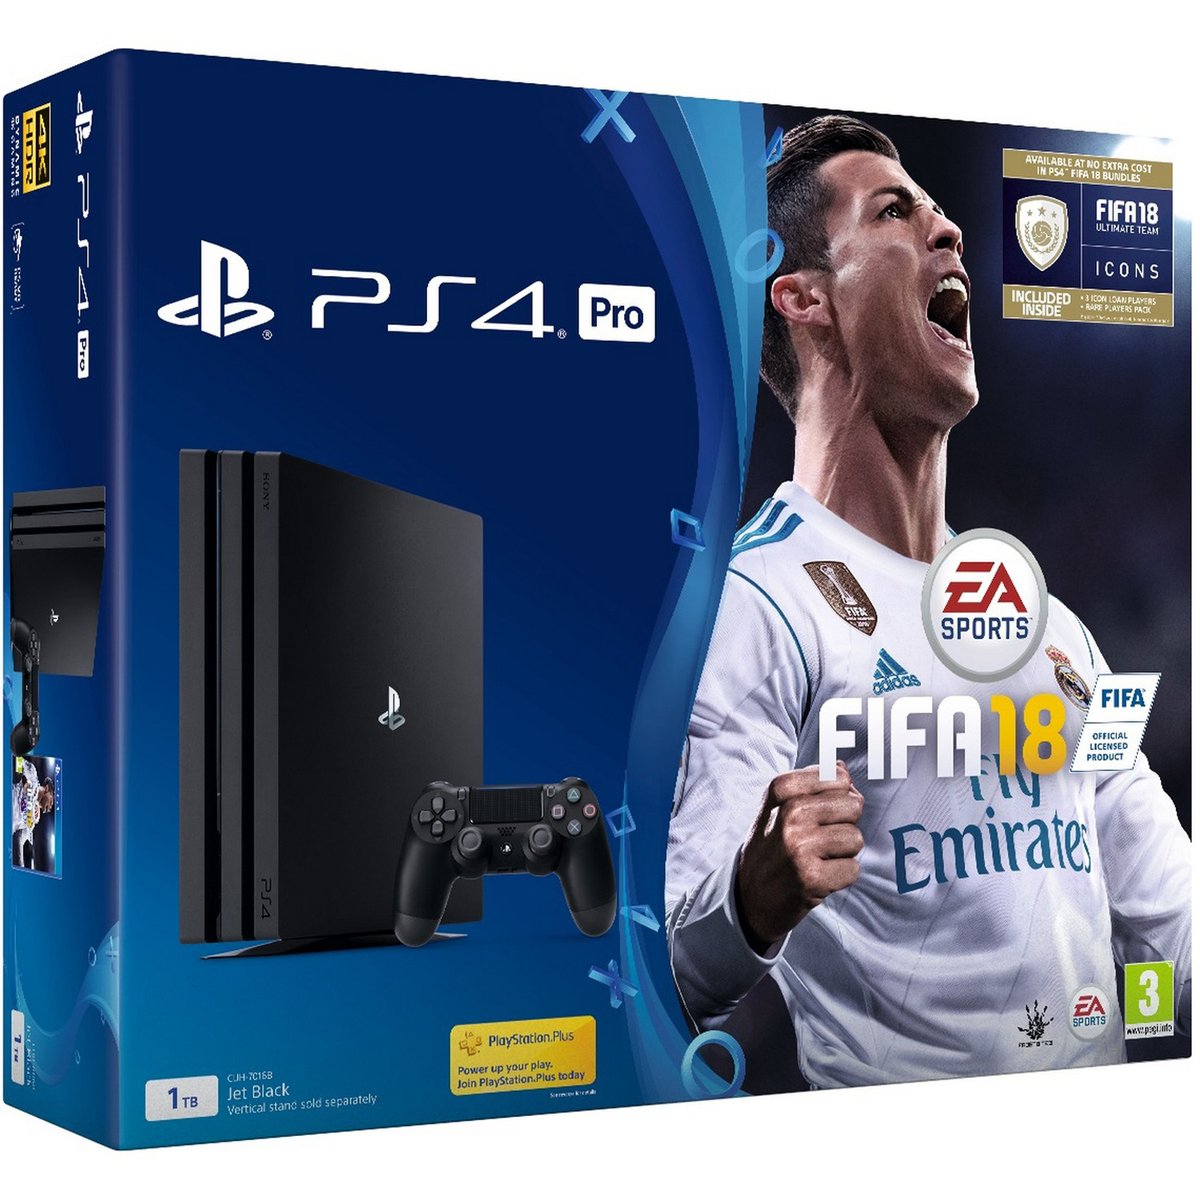 PS4: Buy PlayStation 4 online at Best Prices in UAE